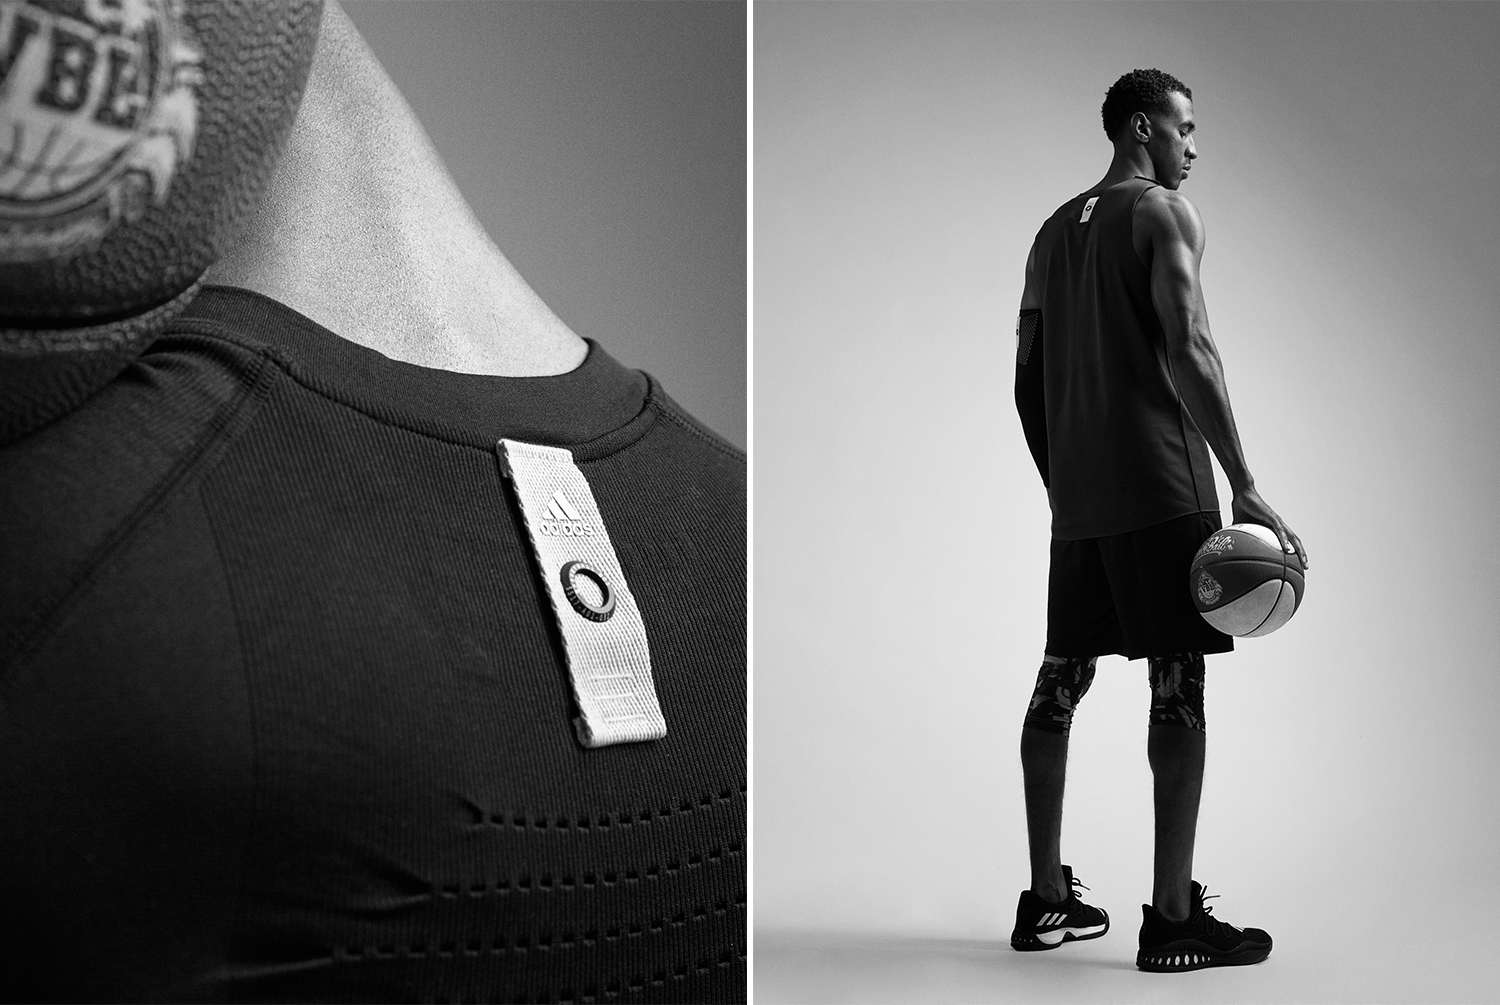 A detail shot and an outfit shot of a Veniceball League player with in an Adidas outfit photographed by Maximilian Baier